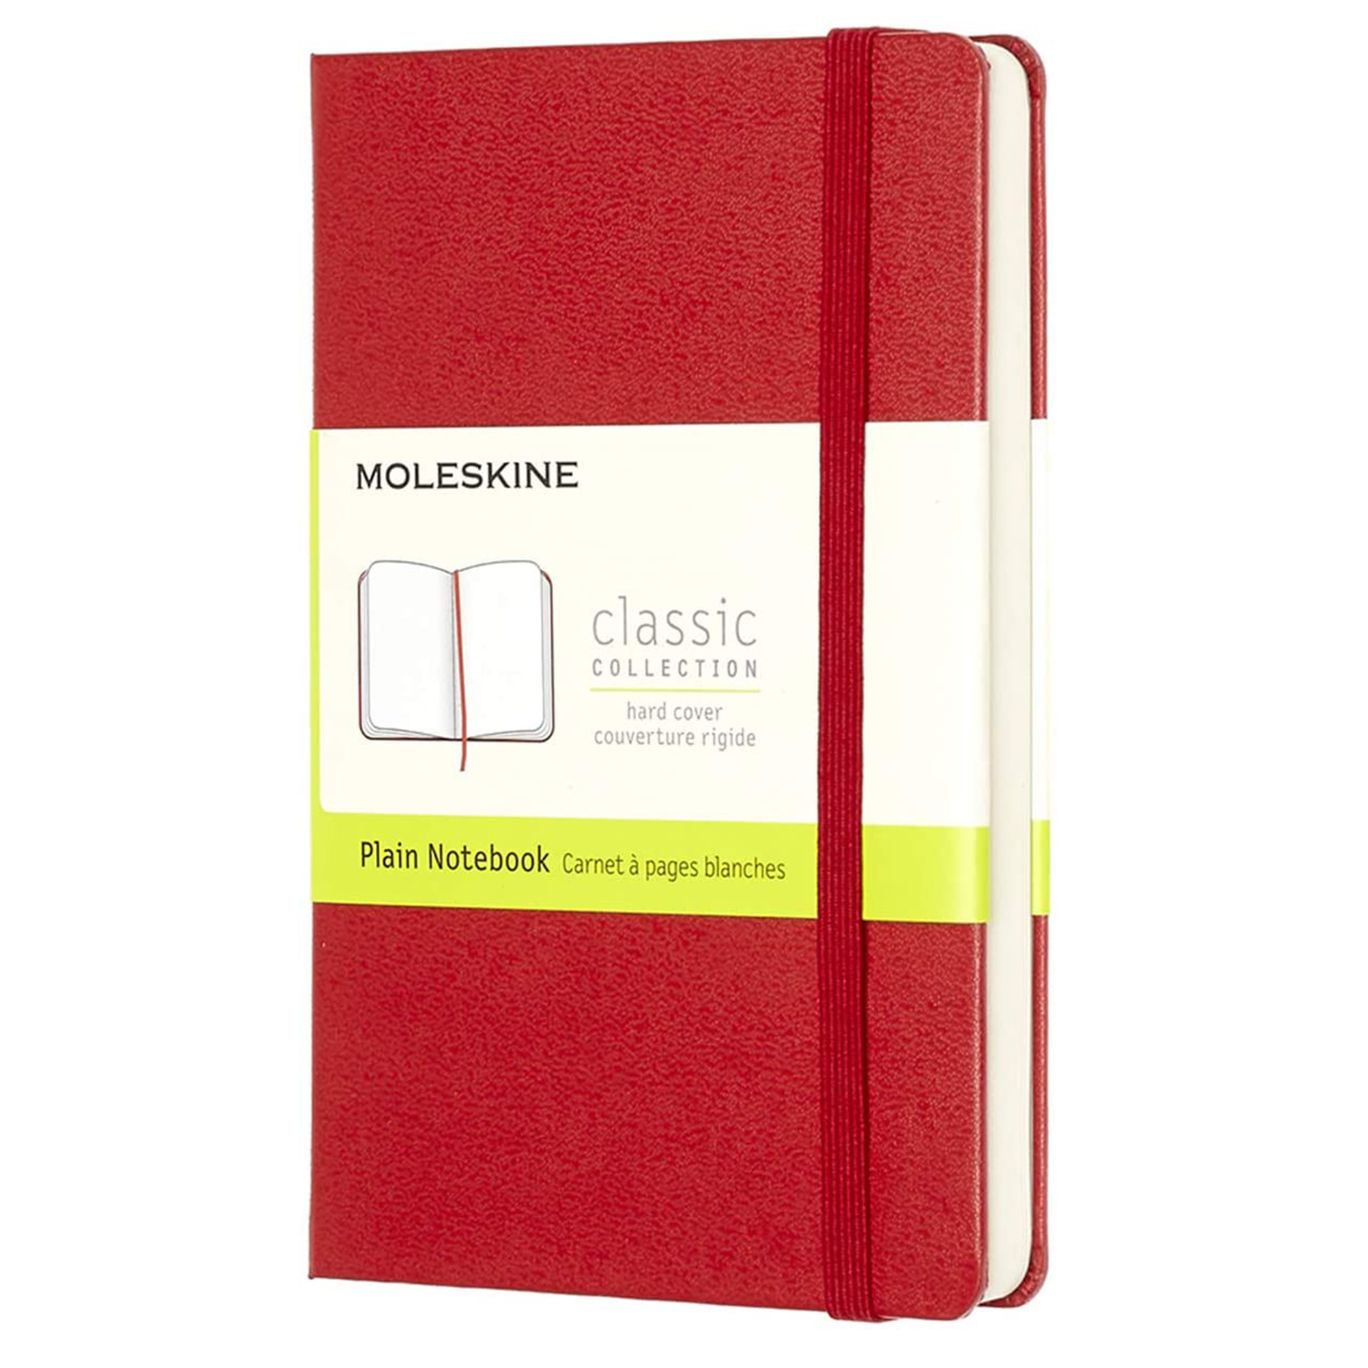 Moleskine Classic Notebook, Extra Large, Plain, Scarlet Red, Hard Cover (7.5 x 10)